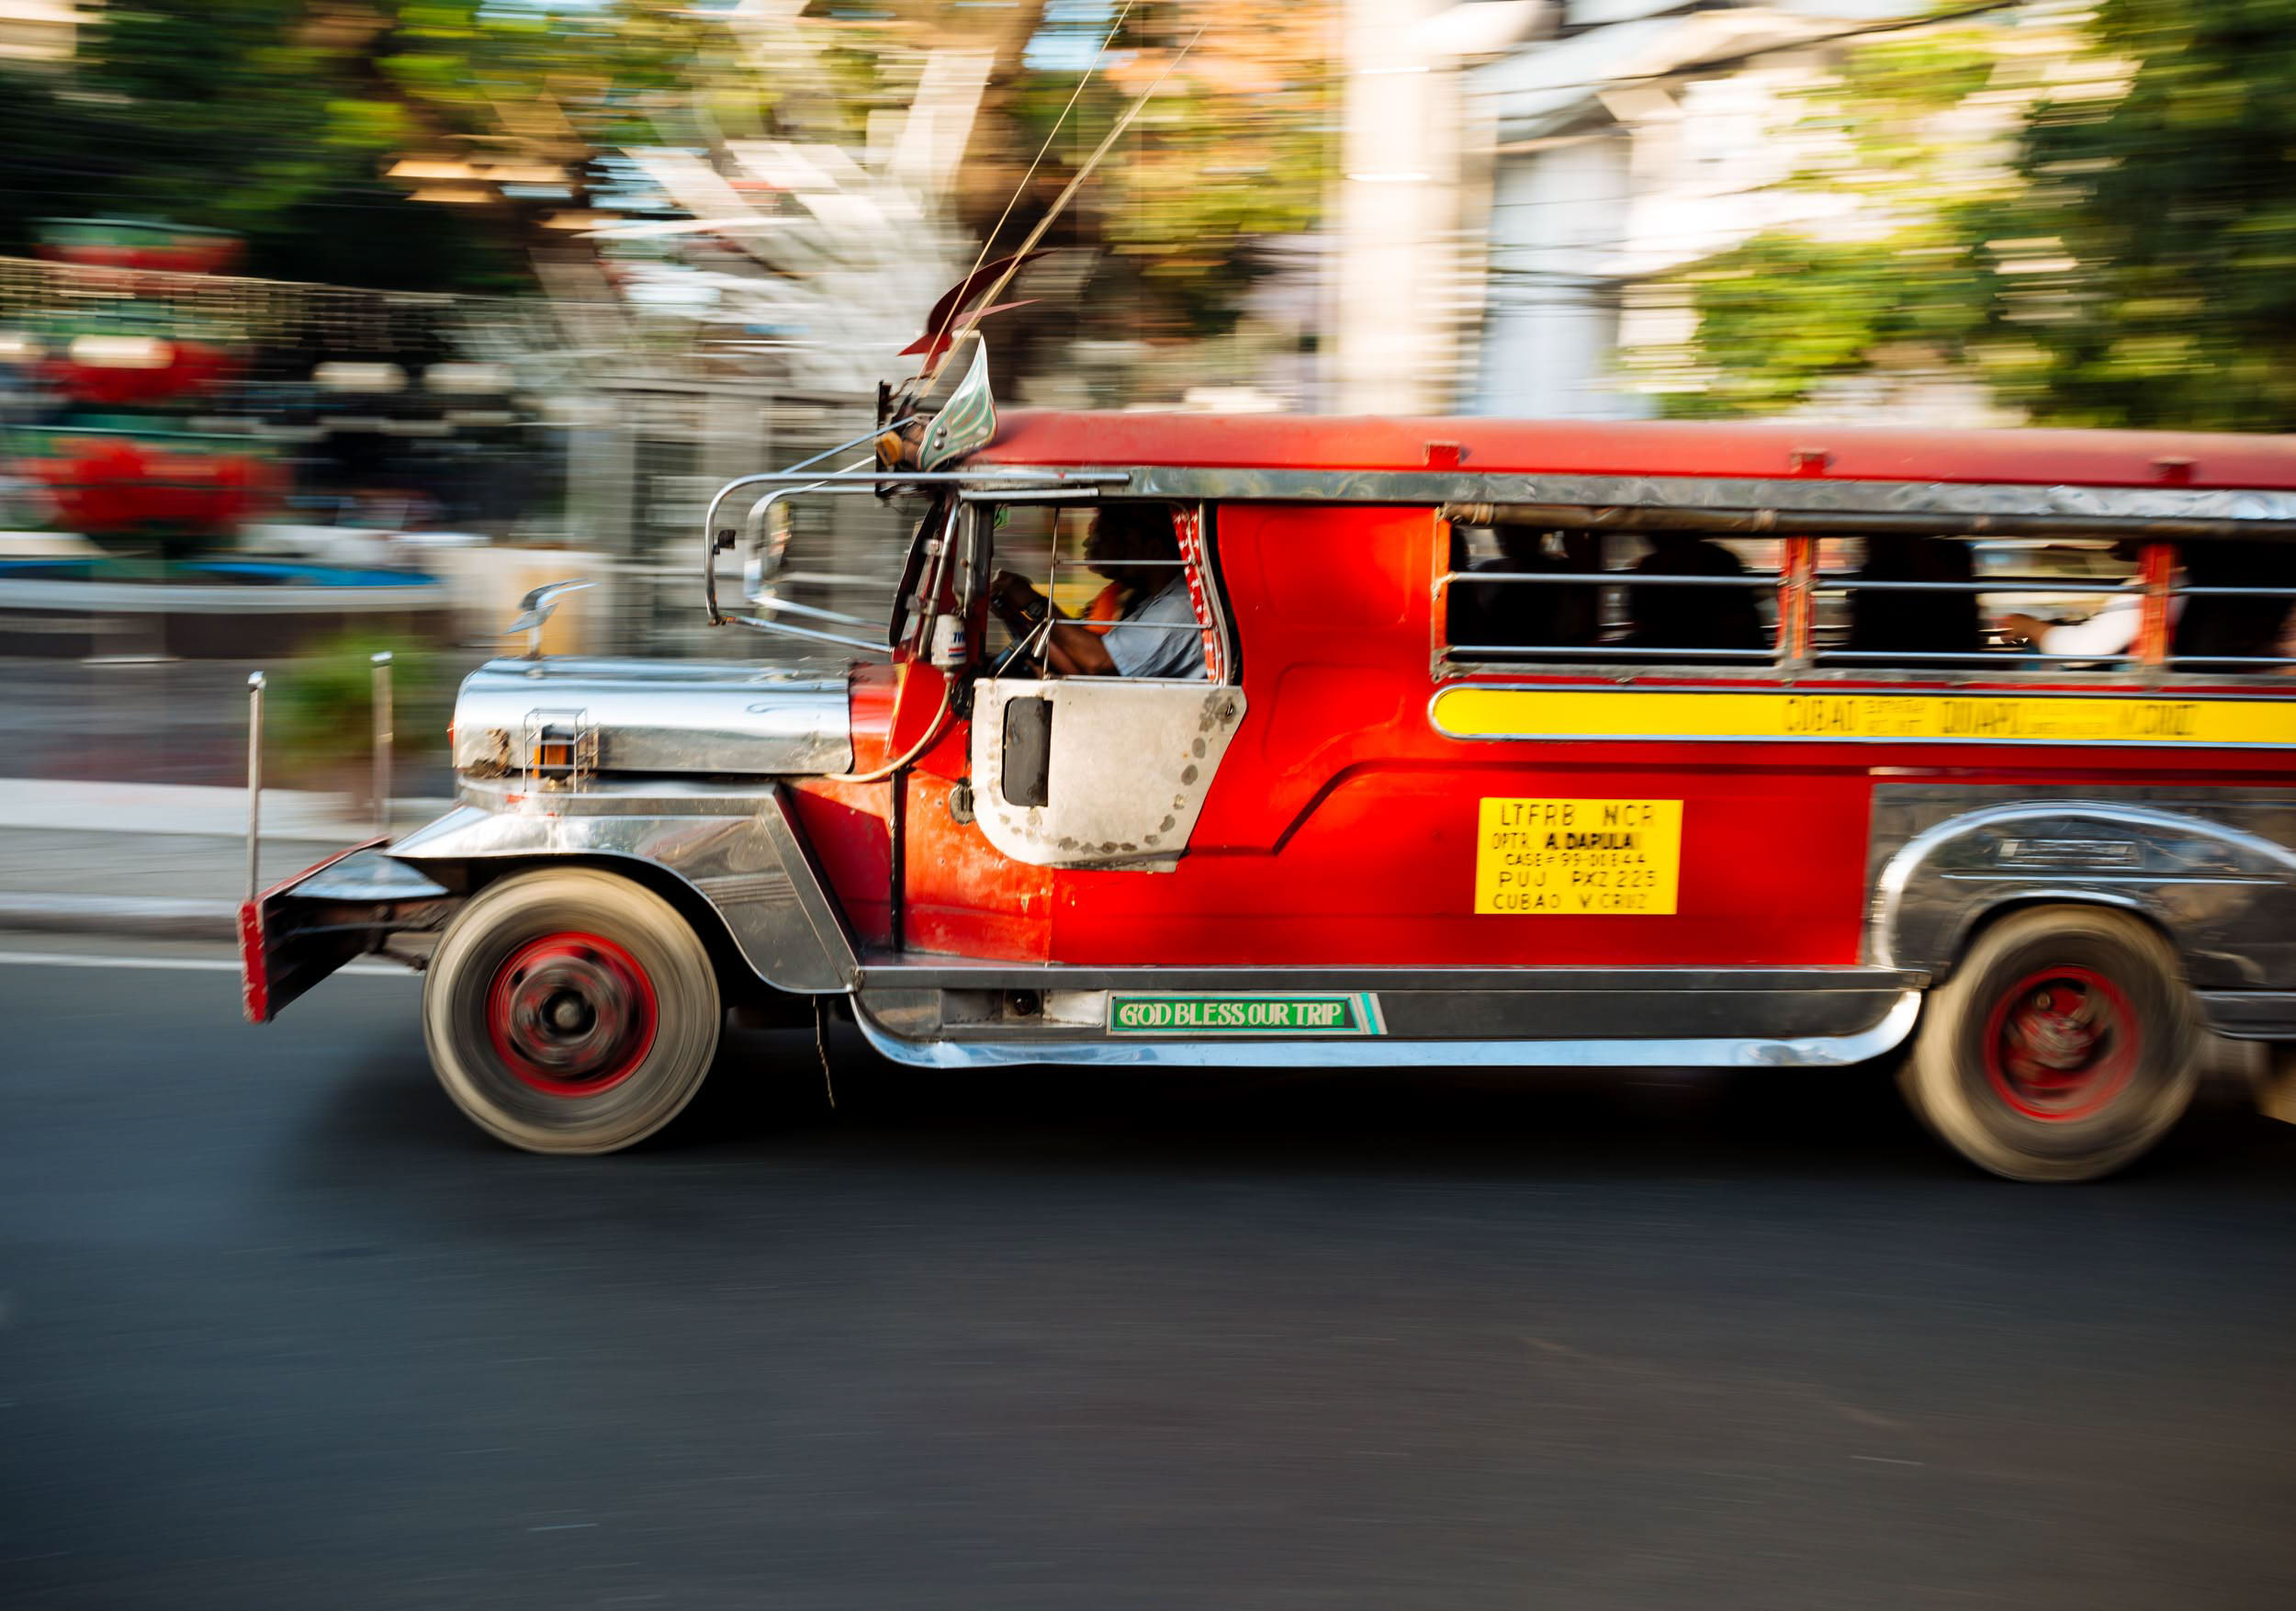 jeepney-traffic-road-vehicle-transport-local-typical-manila-philippines-asia